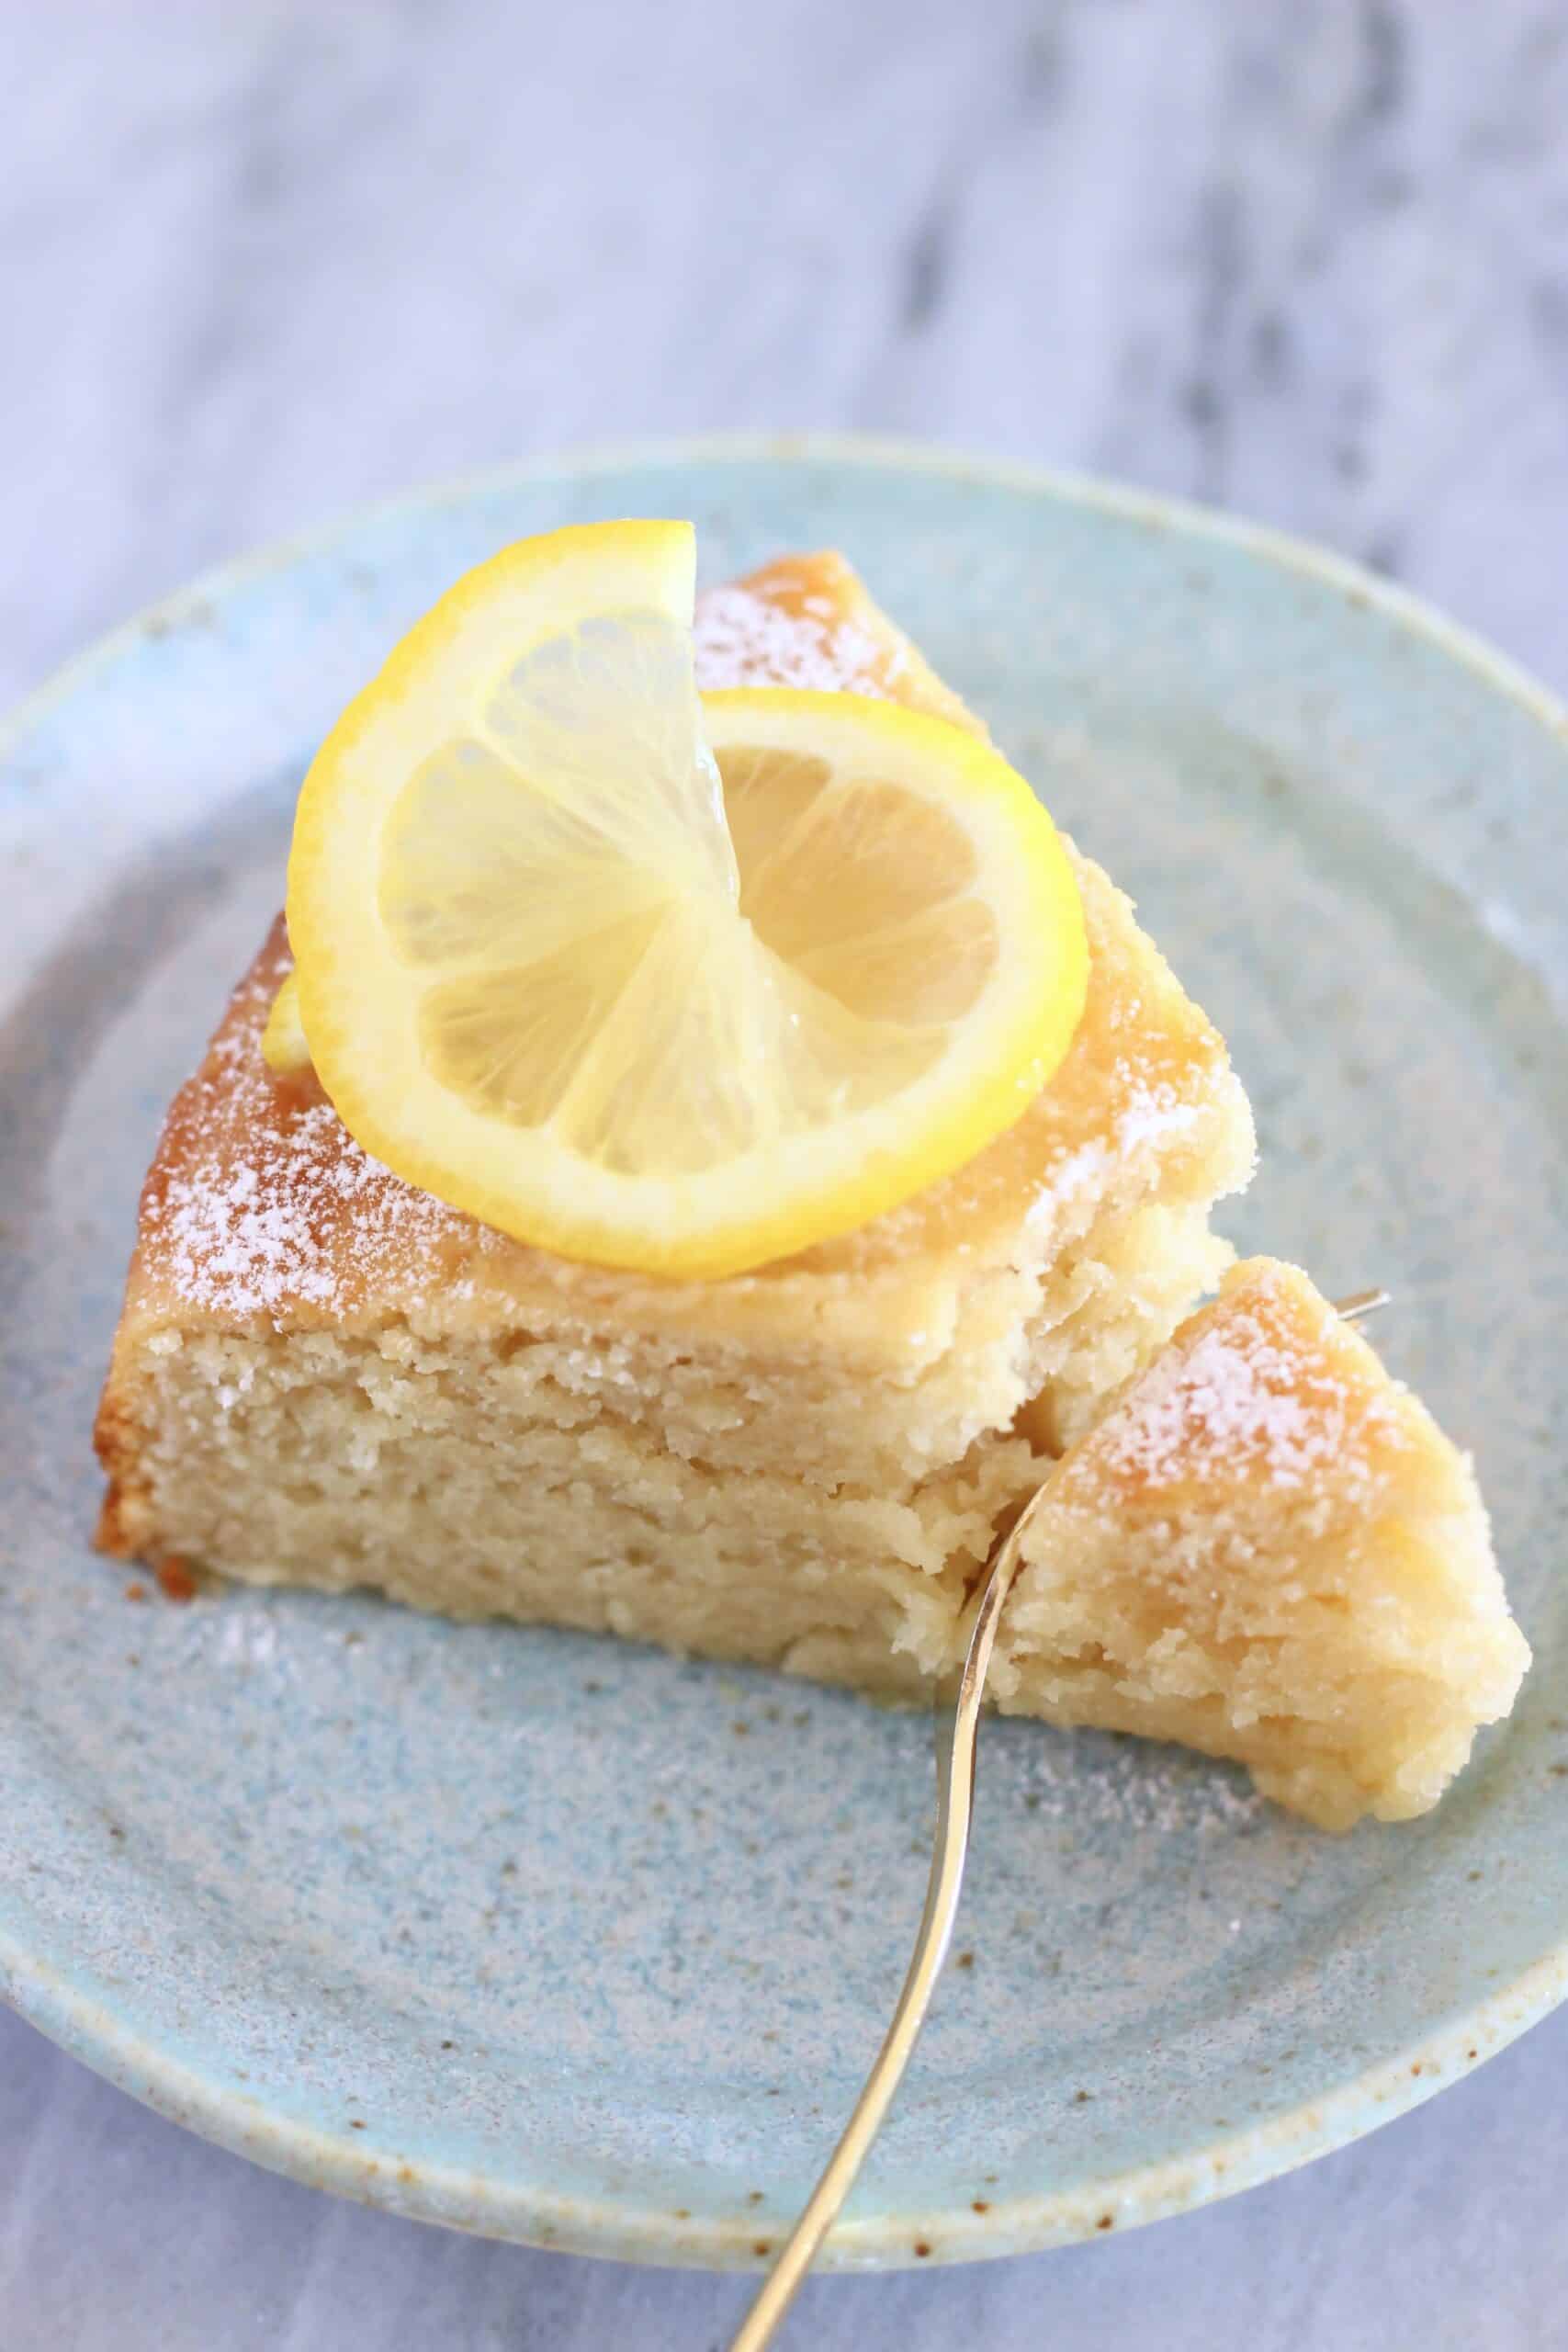 A slice of gluten-free vegan lemon yogurt cake on a plate with a fork taking a bite out of it